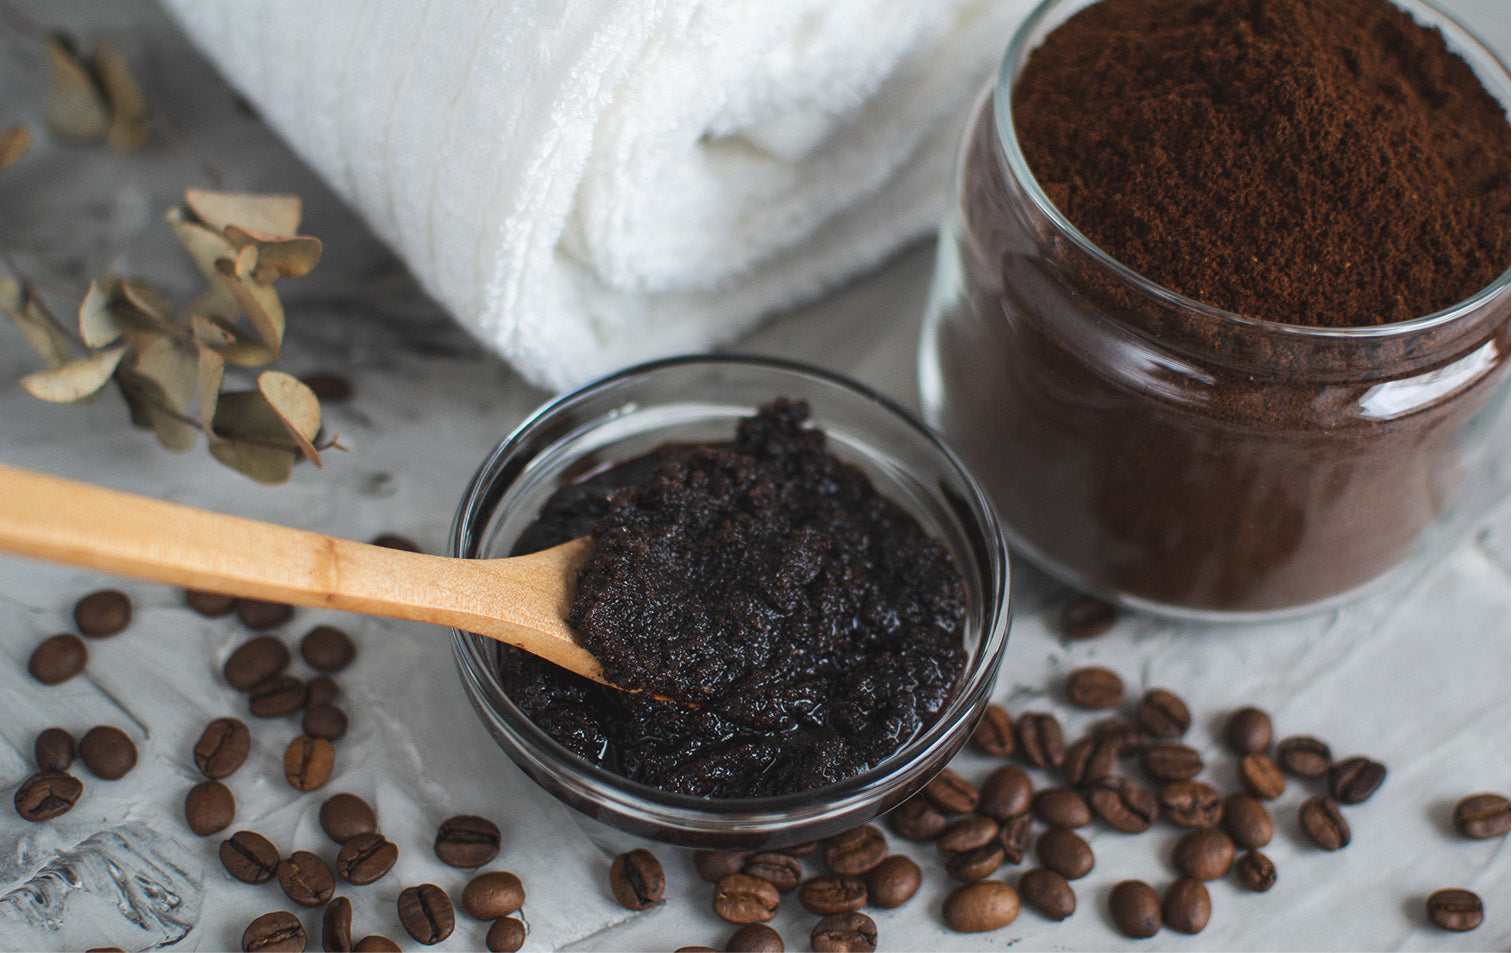 Are There Benefits to Coffee in Your Hair?